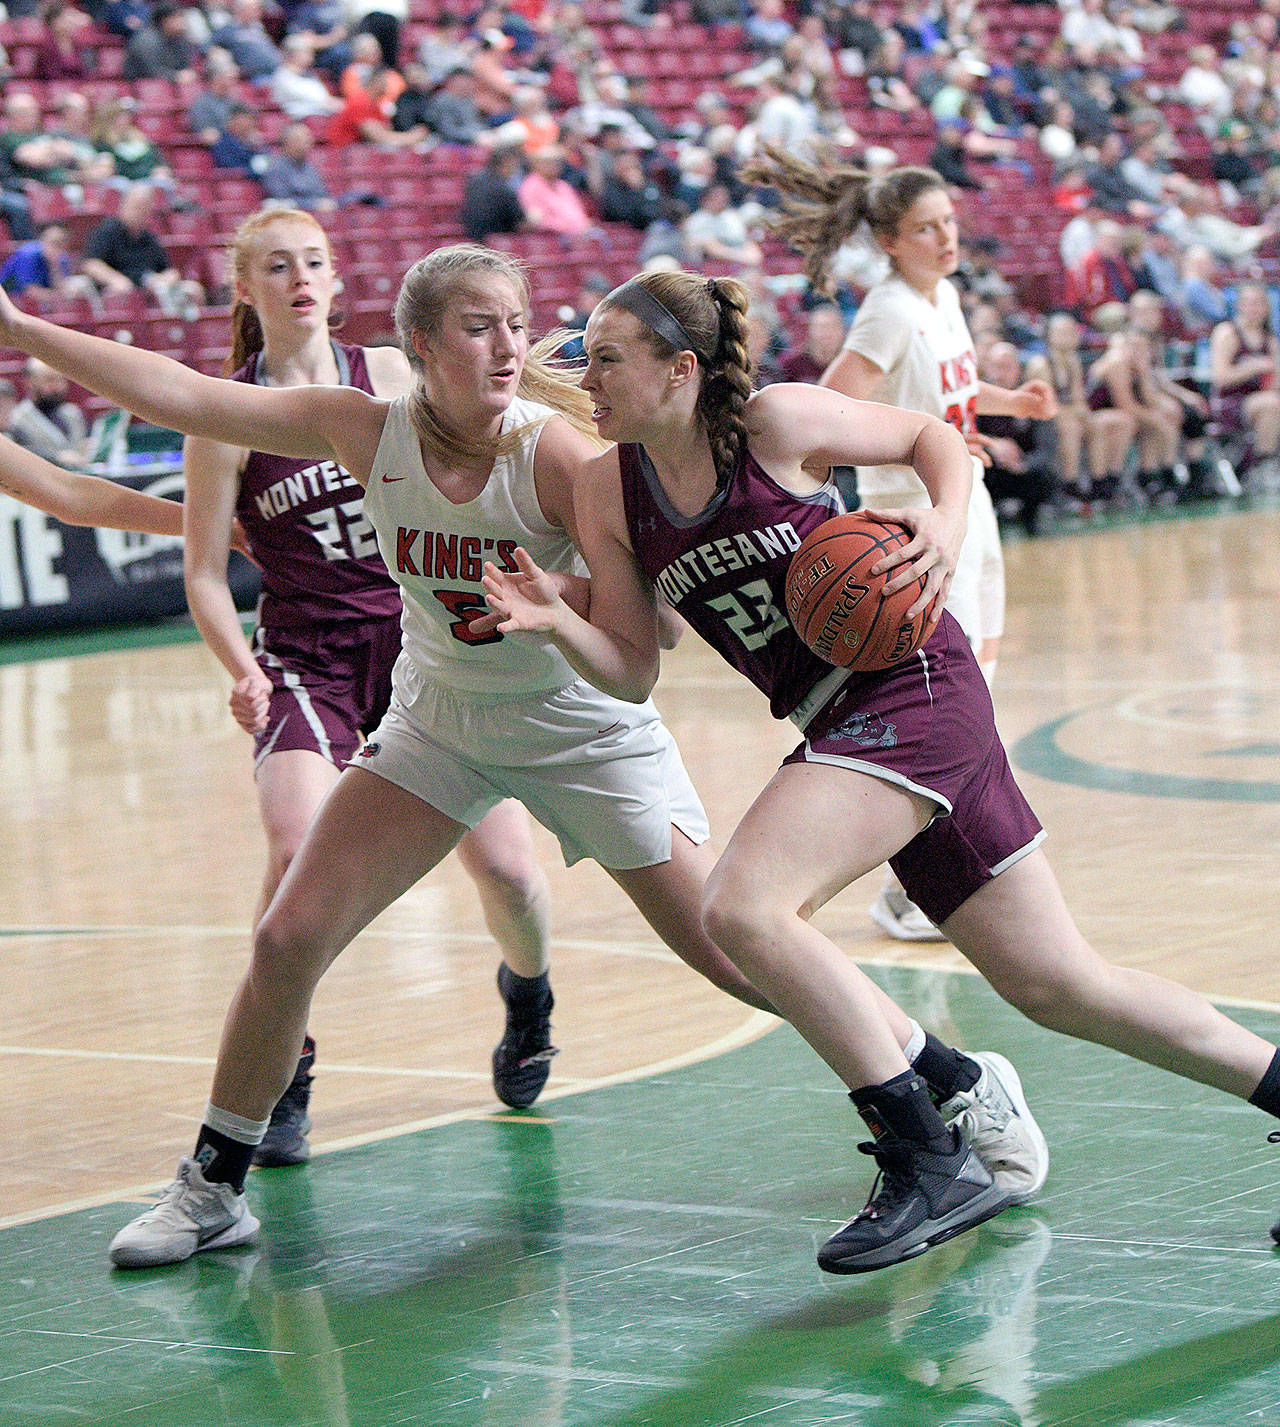 Montesano’s Paige Lisherness (23) drives the lane against Kings’ Mia Flor during the Bulldogs’ 65-43 first-round loss on Wednesday in the 1A State Tournament at the SunDome in Yakima. (Photo by Robert Beldin)